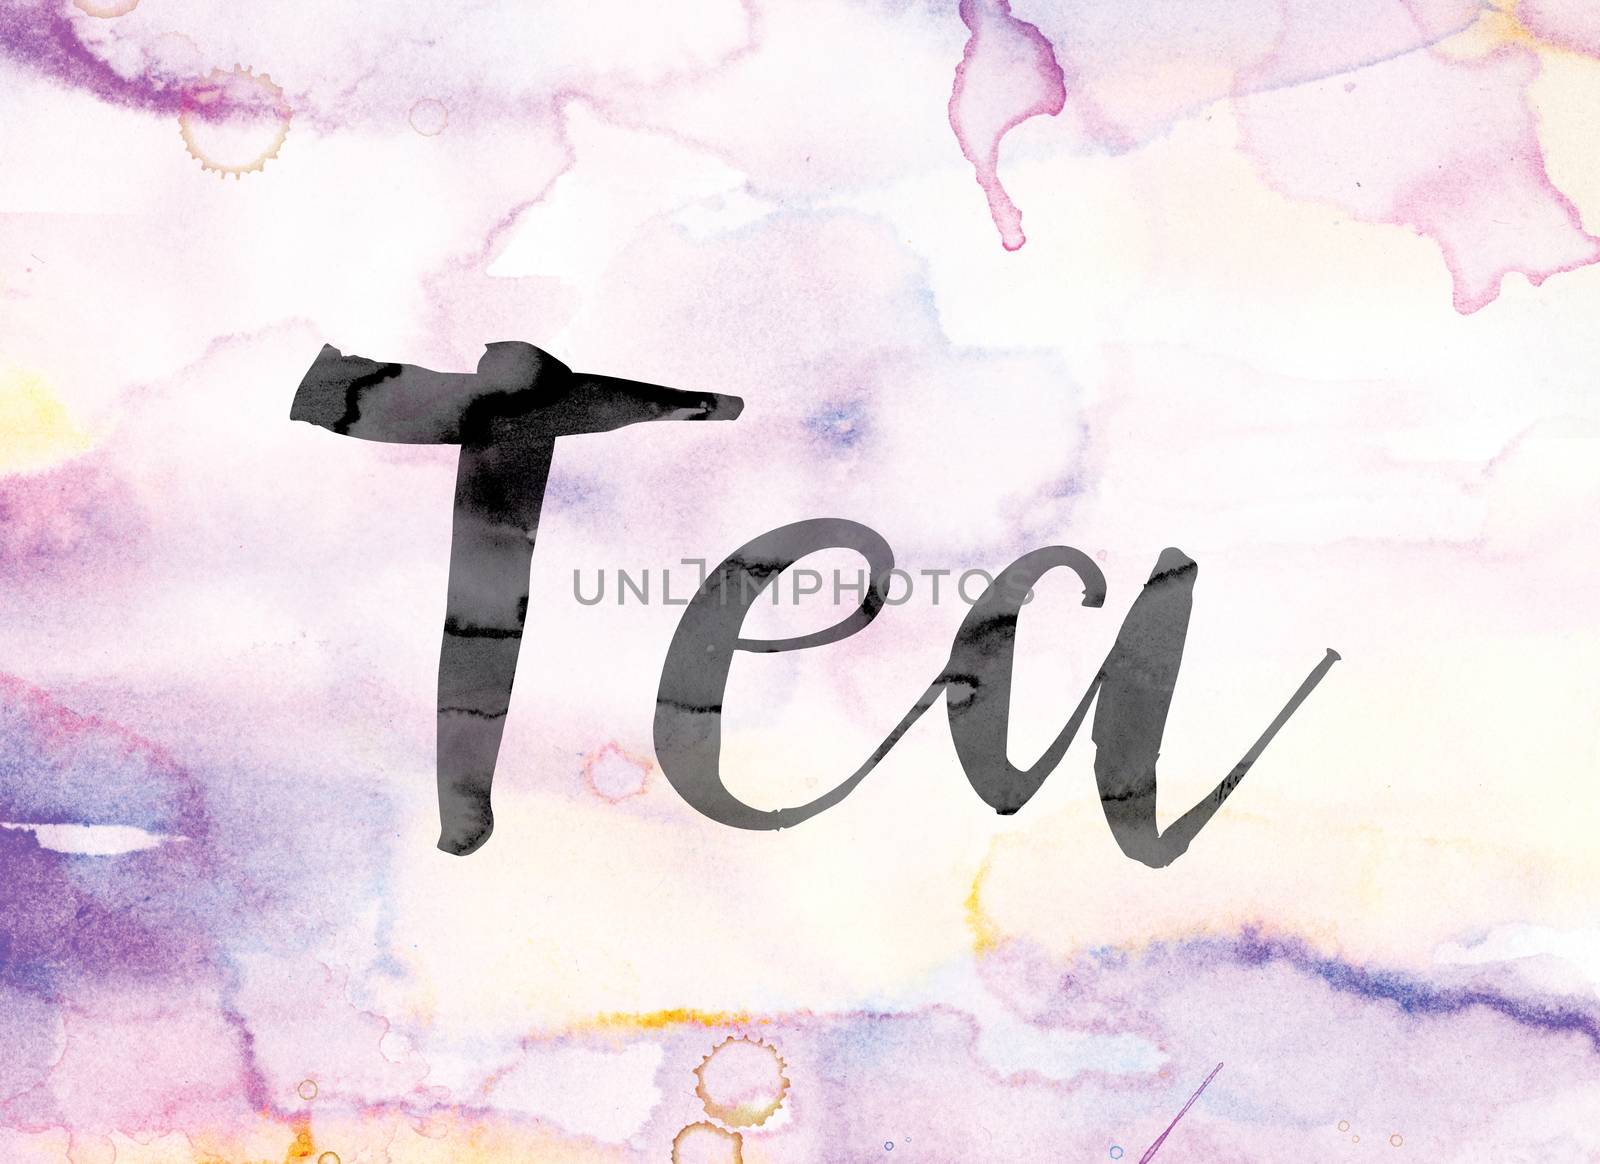 The word "Tea" painted in black ink over a colorful watercolor washed background concept and theme.